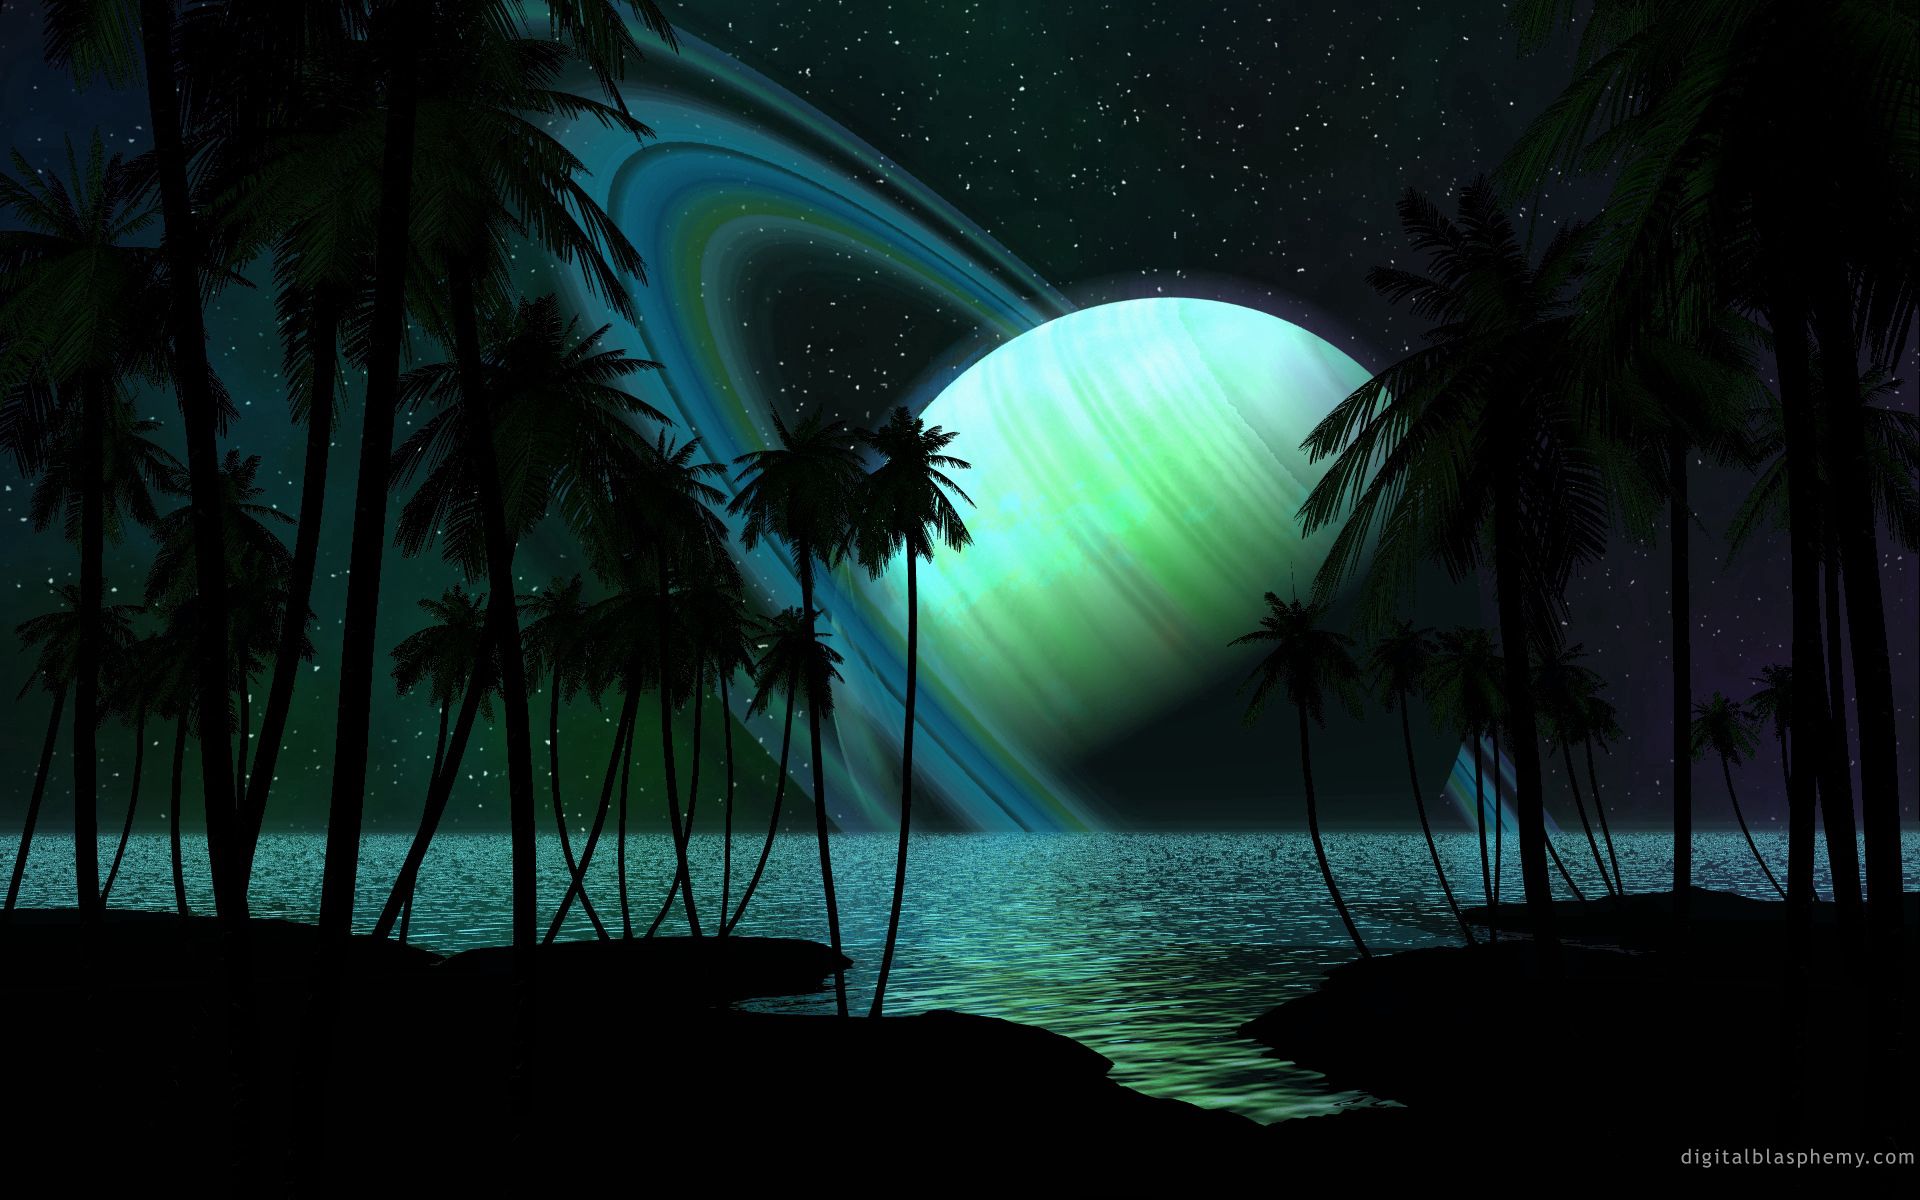 universe, saturn, water, palms, darkness, fiction, that's incredible